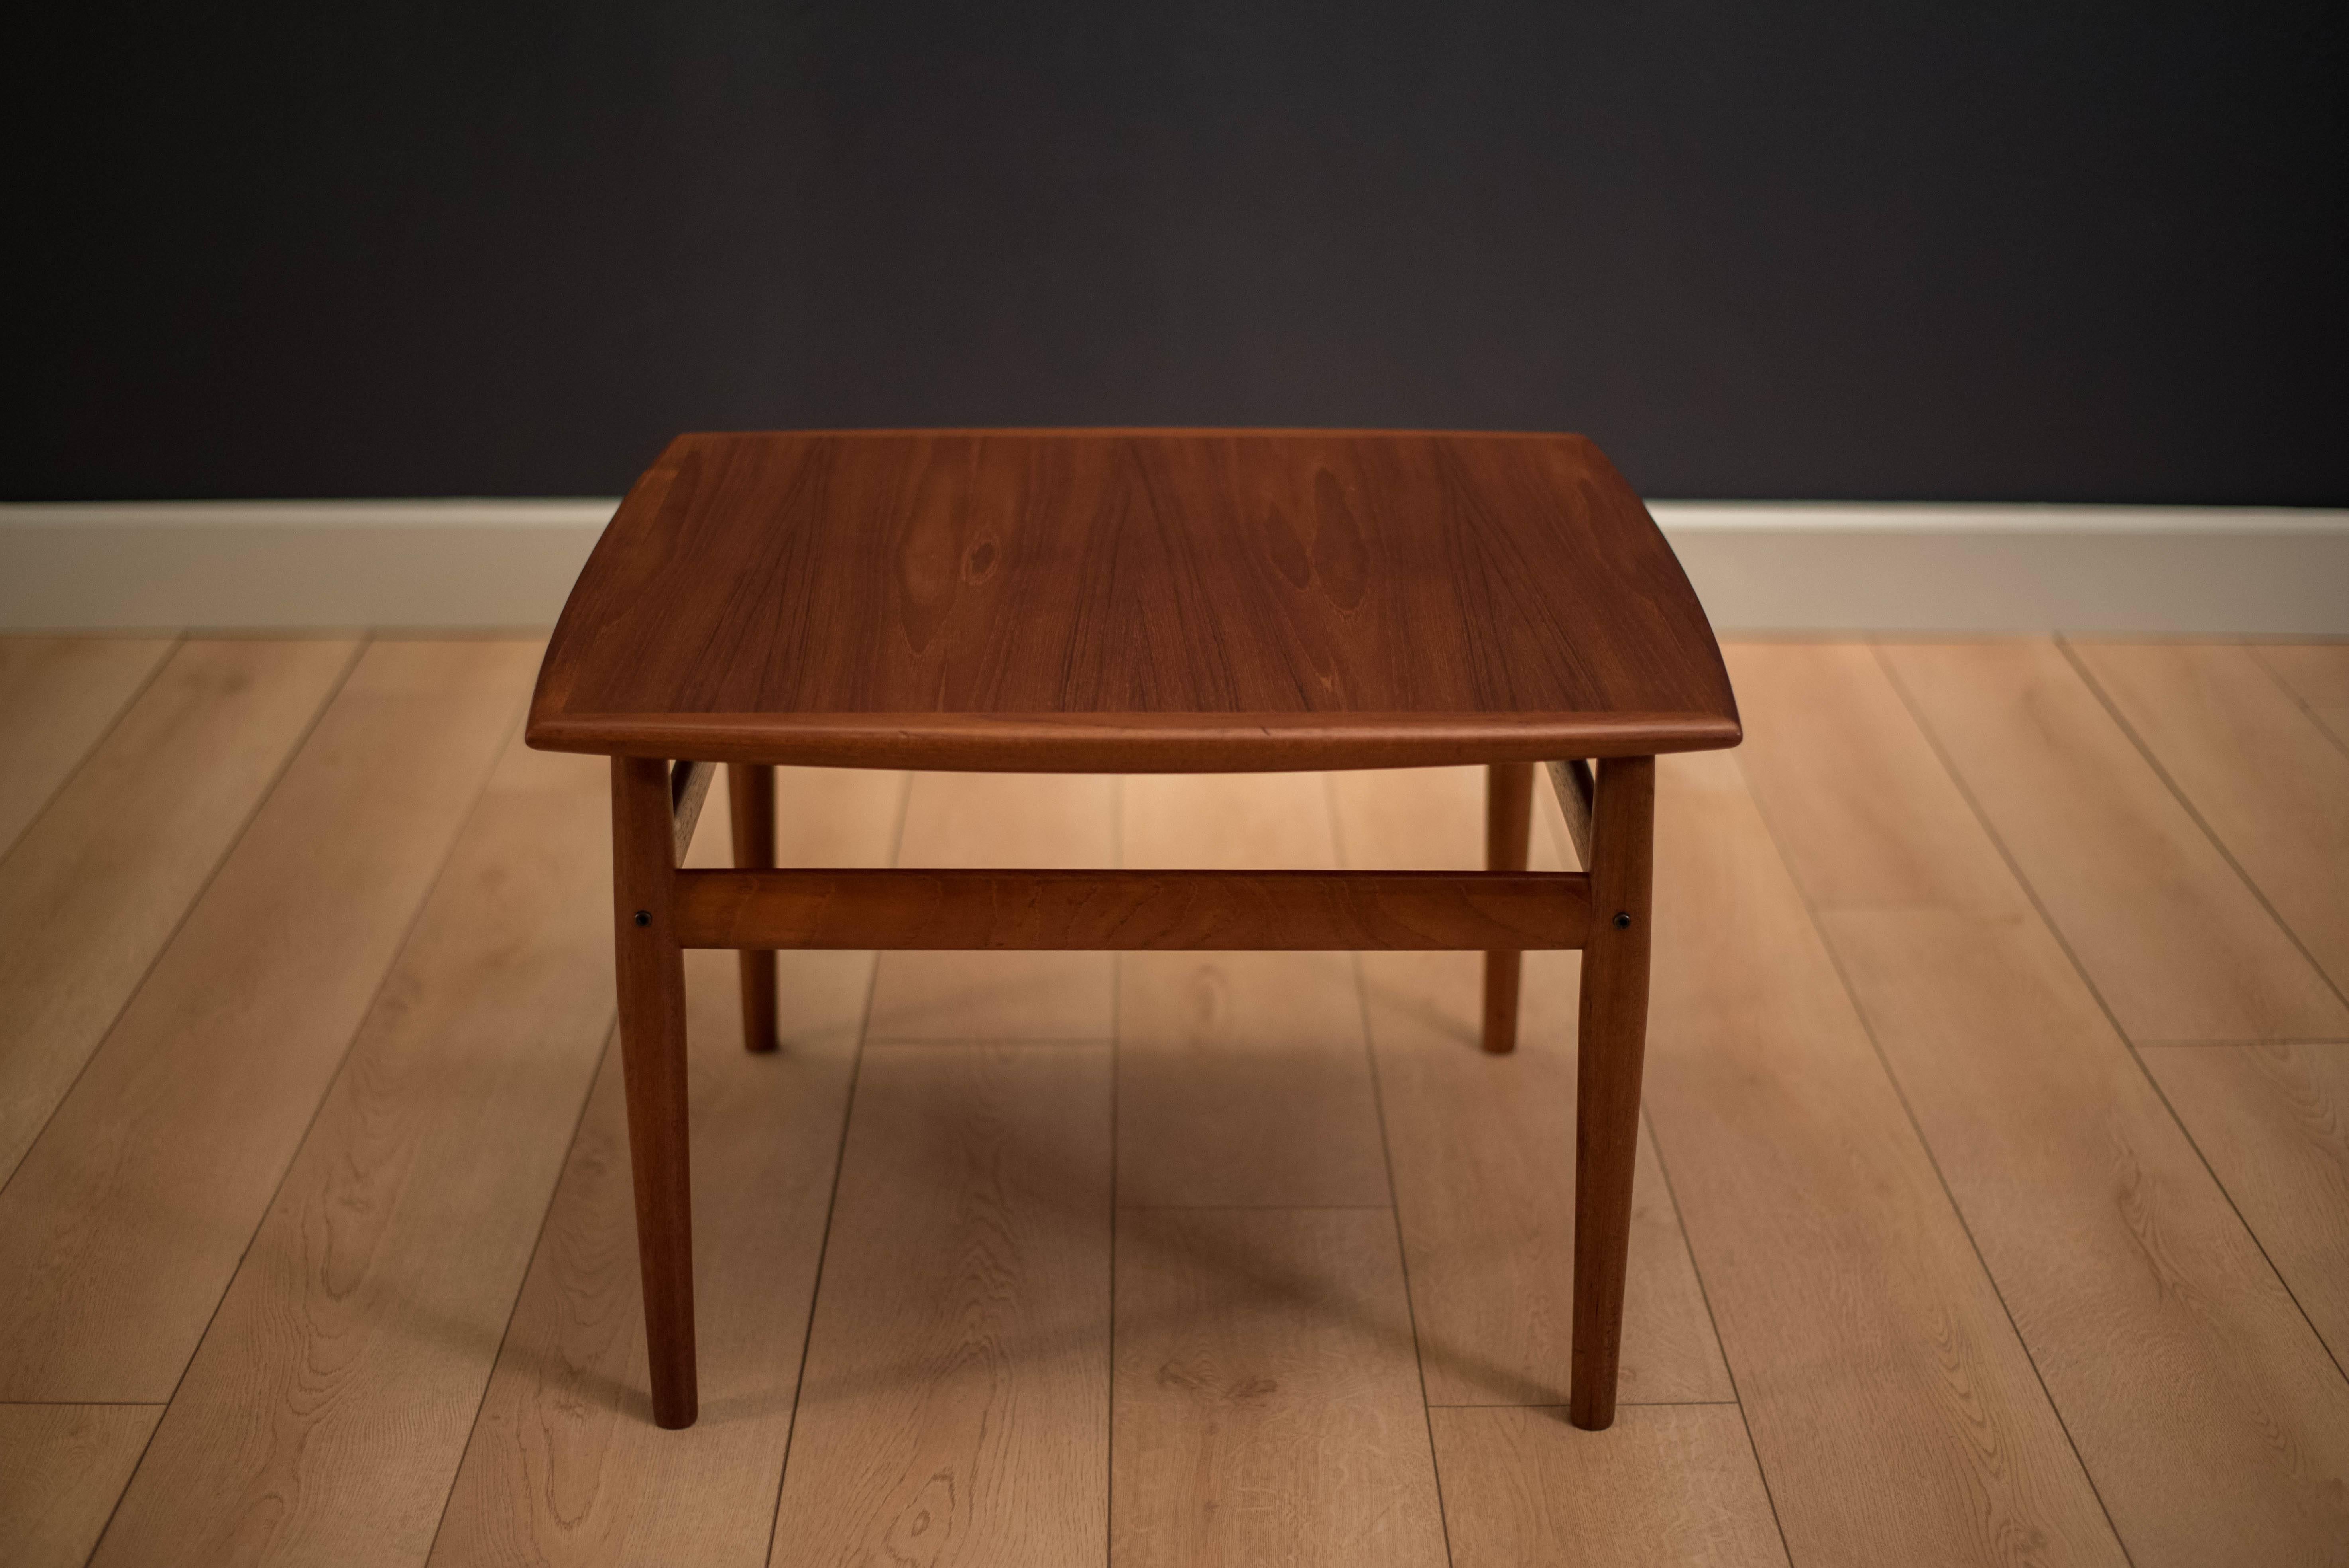 Mid-Century Modern table by Grete Jalk for Glostrup Mobelfabrik in teak. This piece can be used as a coffee table or side occasional table.